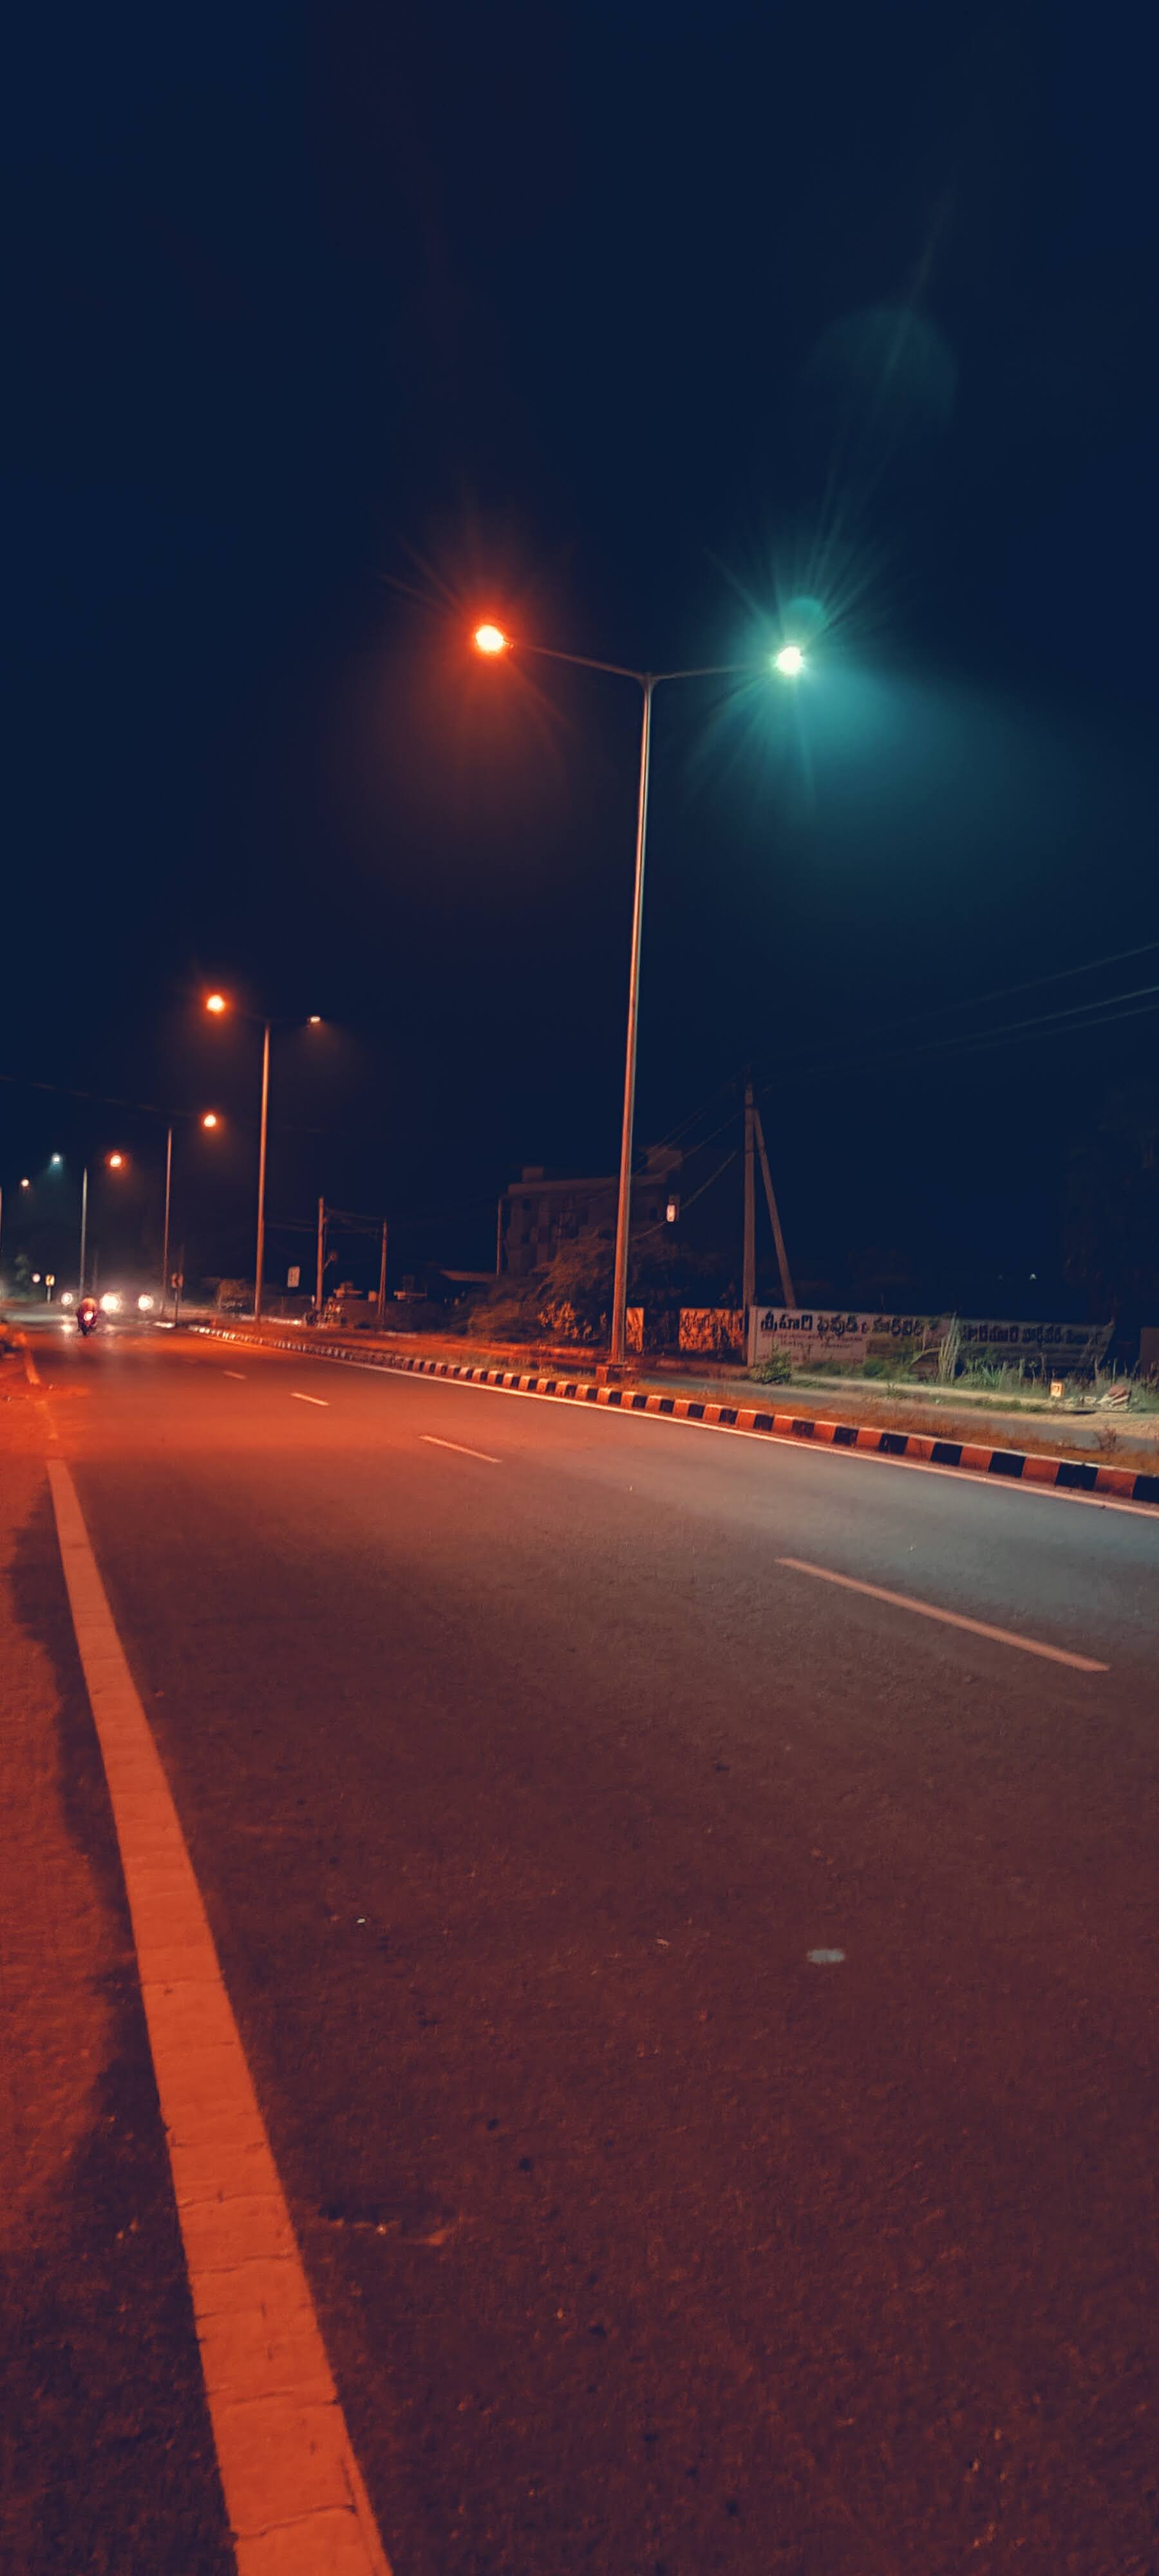 Night View of a Road by saikumar10900 - Image Abyss